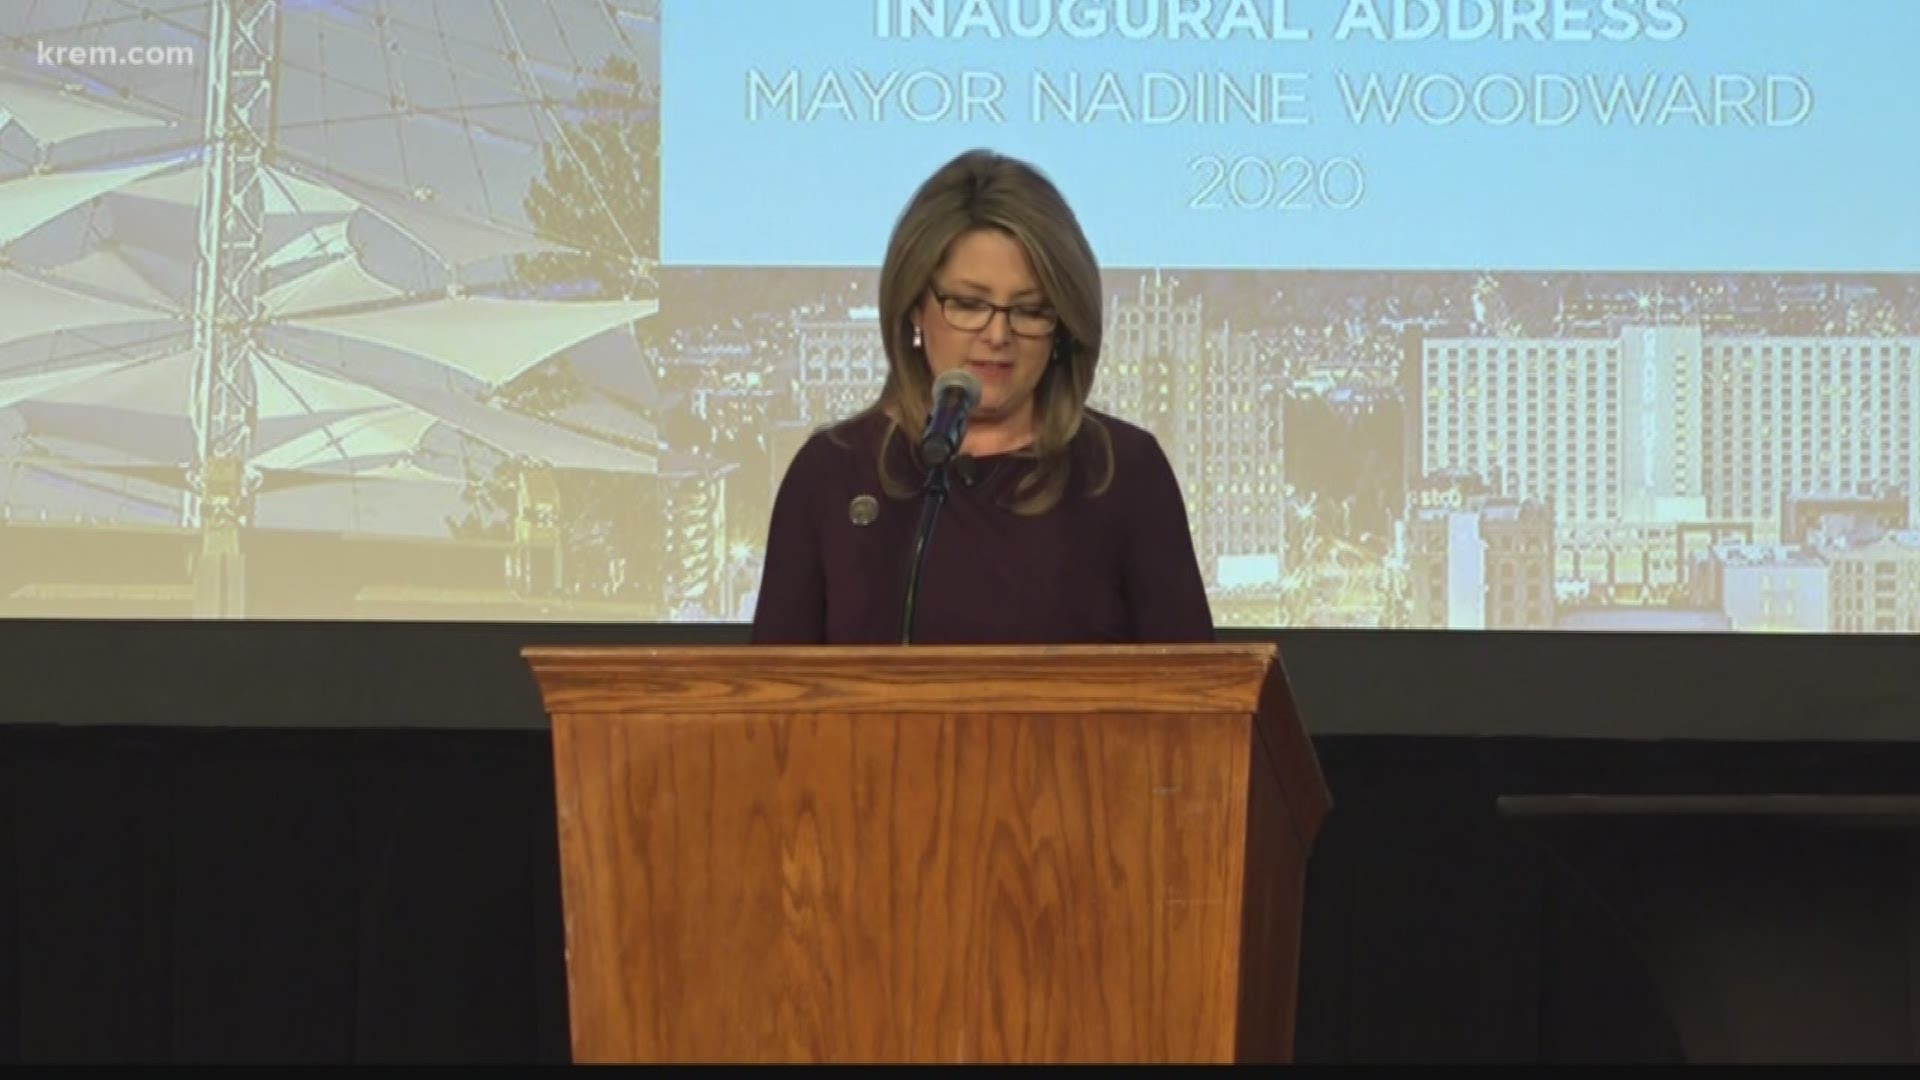 Woodward said her administration had four main priorities going forward: homelessness, housing, economic development, and public safety.